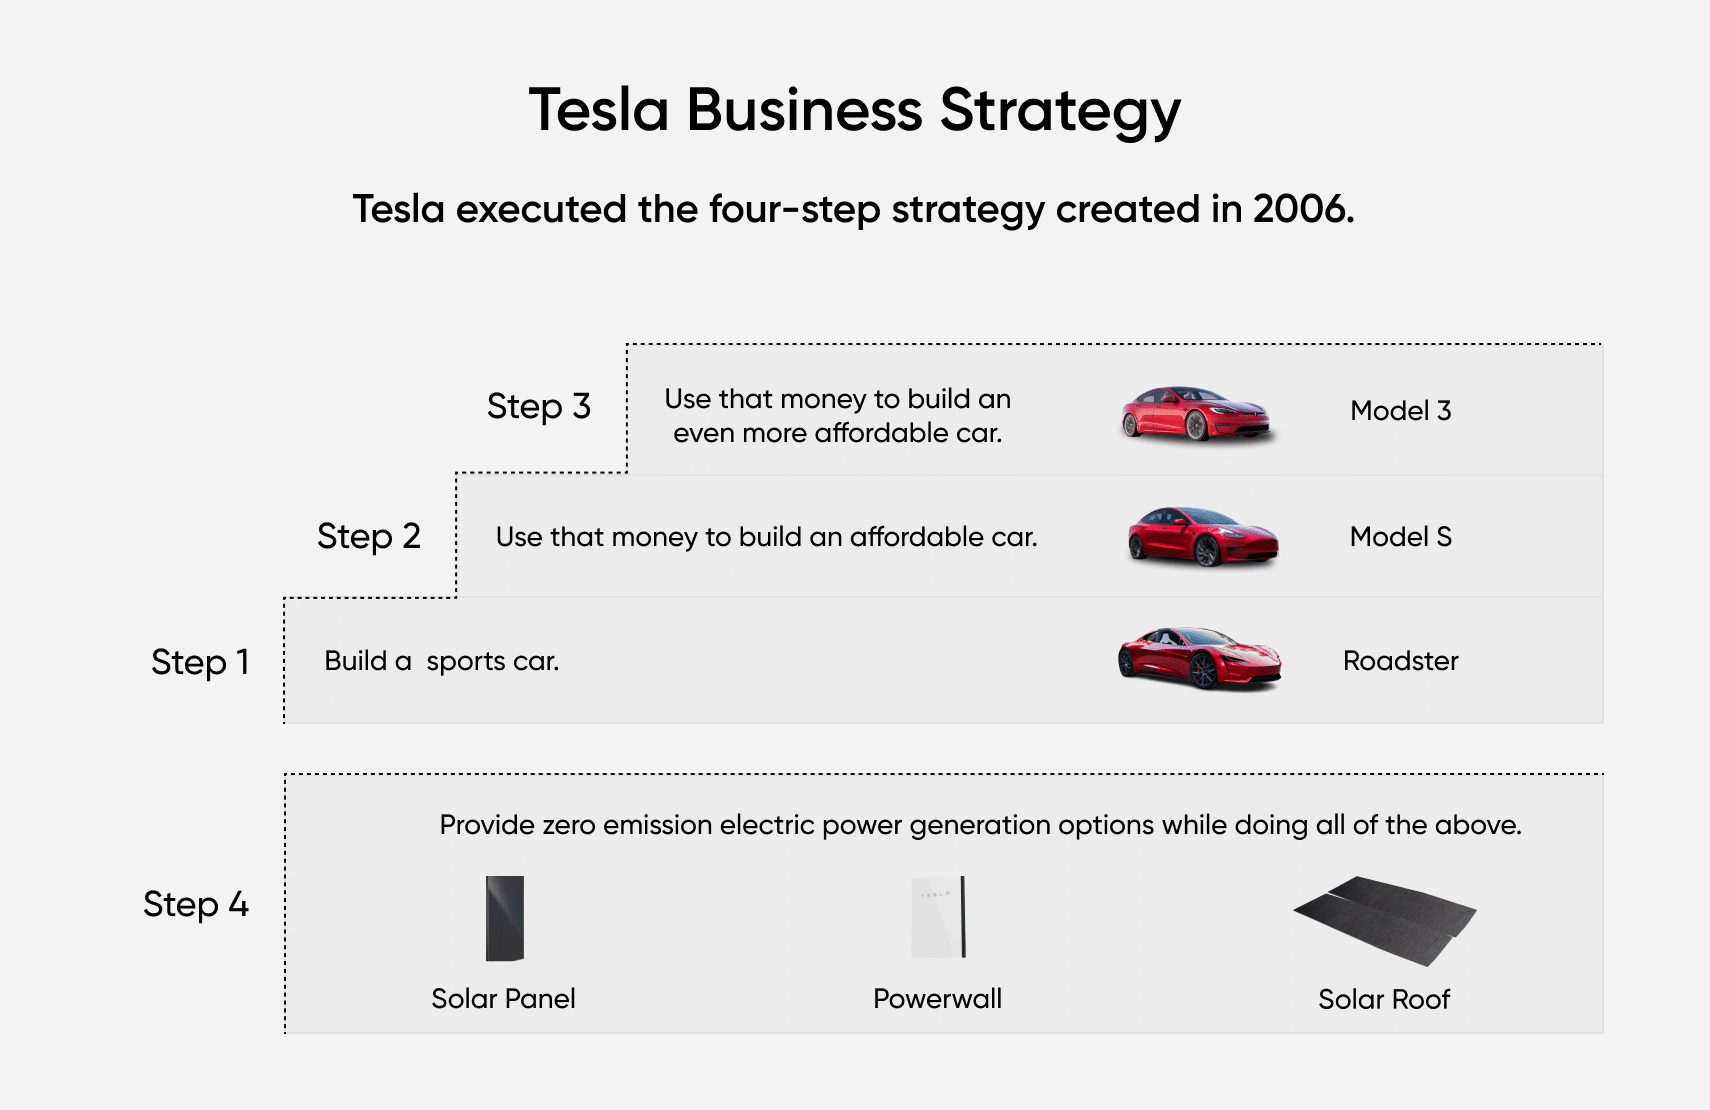 Tesla business strategy: Tesla executed the four-step strategy created in 2006.